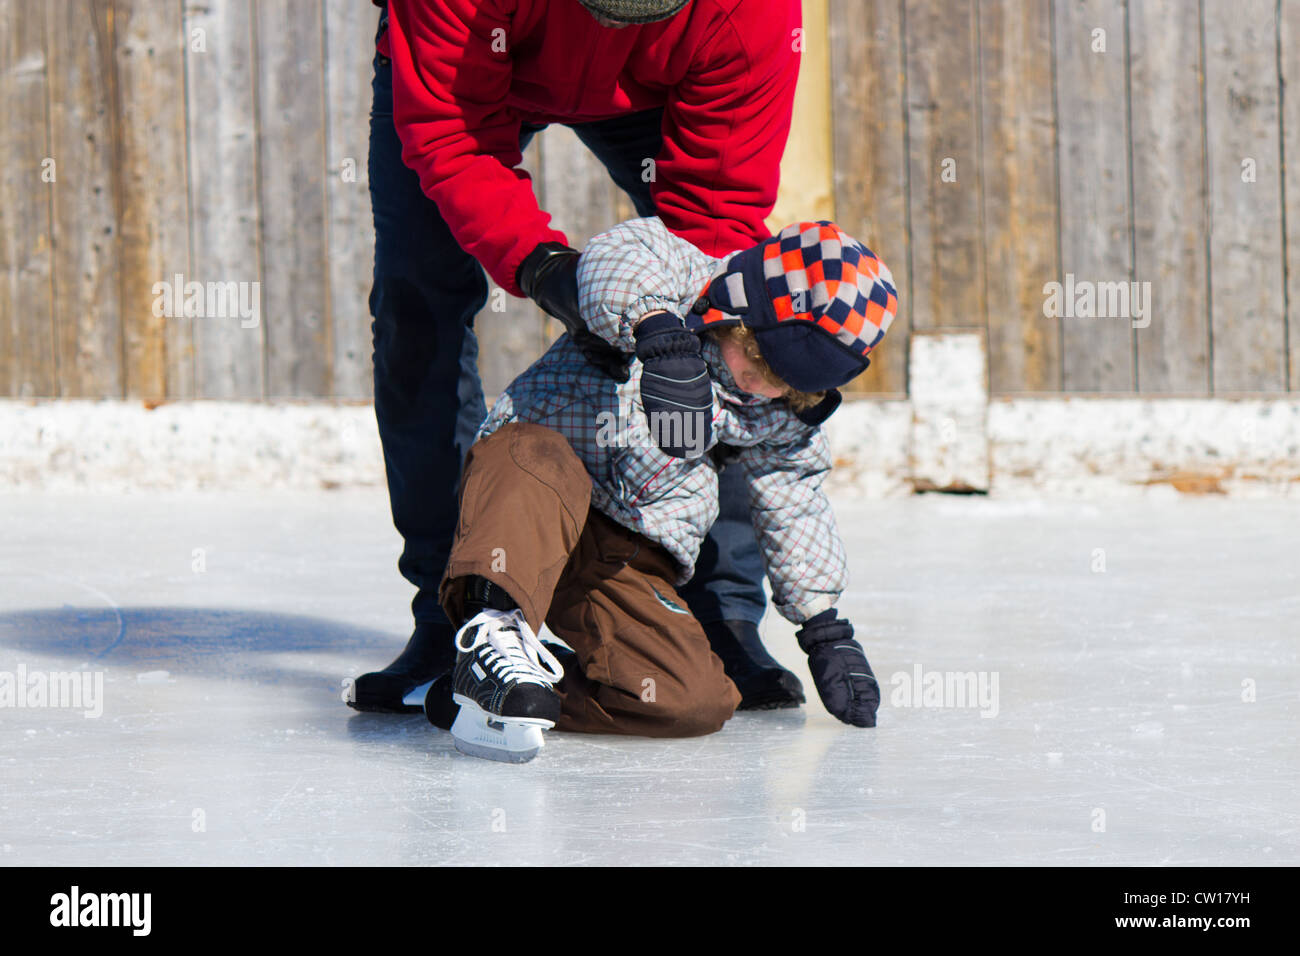 Father teaching son how to ice skate at an outdoor skating rink in winter. Stock Photo